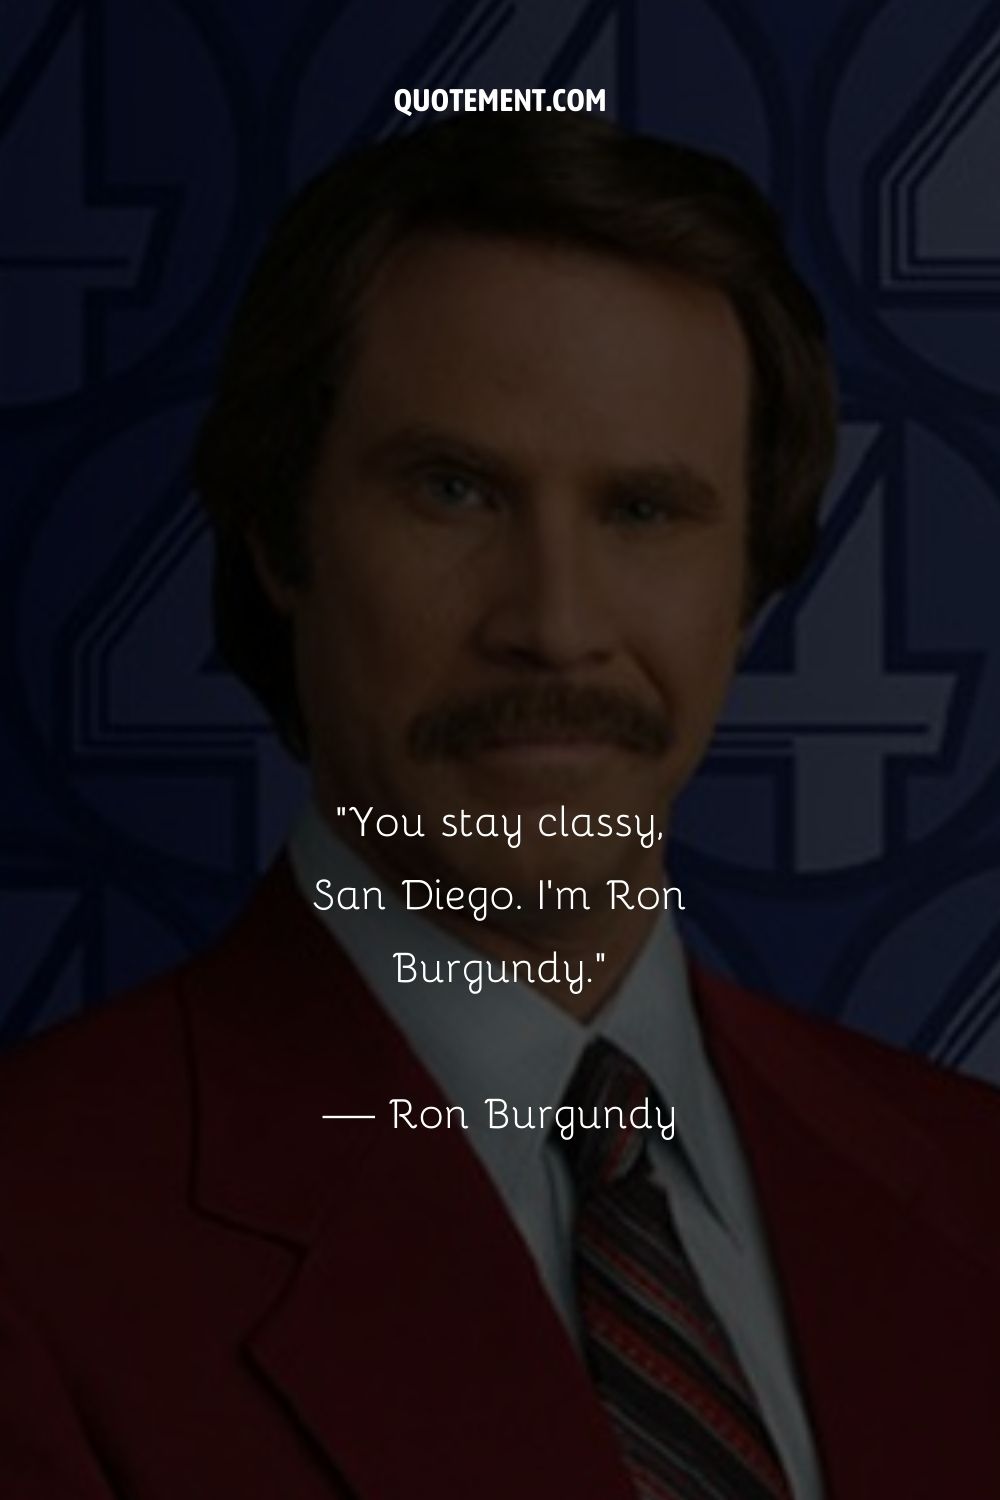 Portrait of the famous anchorman representing the best of Ron Burgundy quotes.